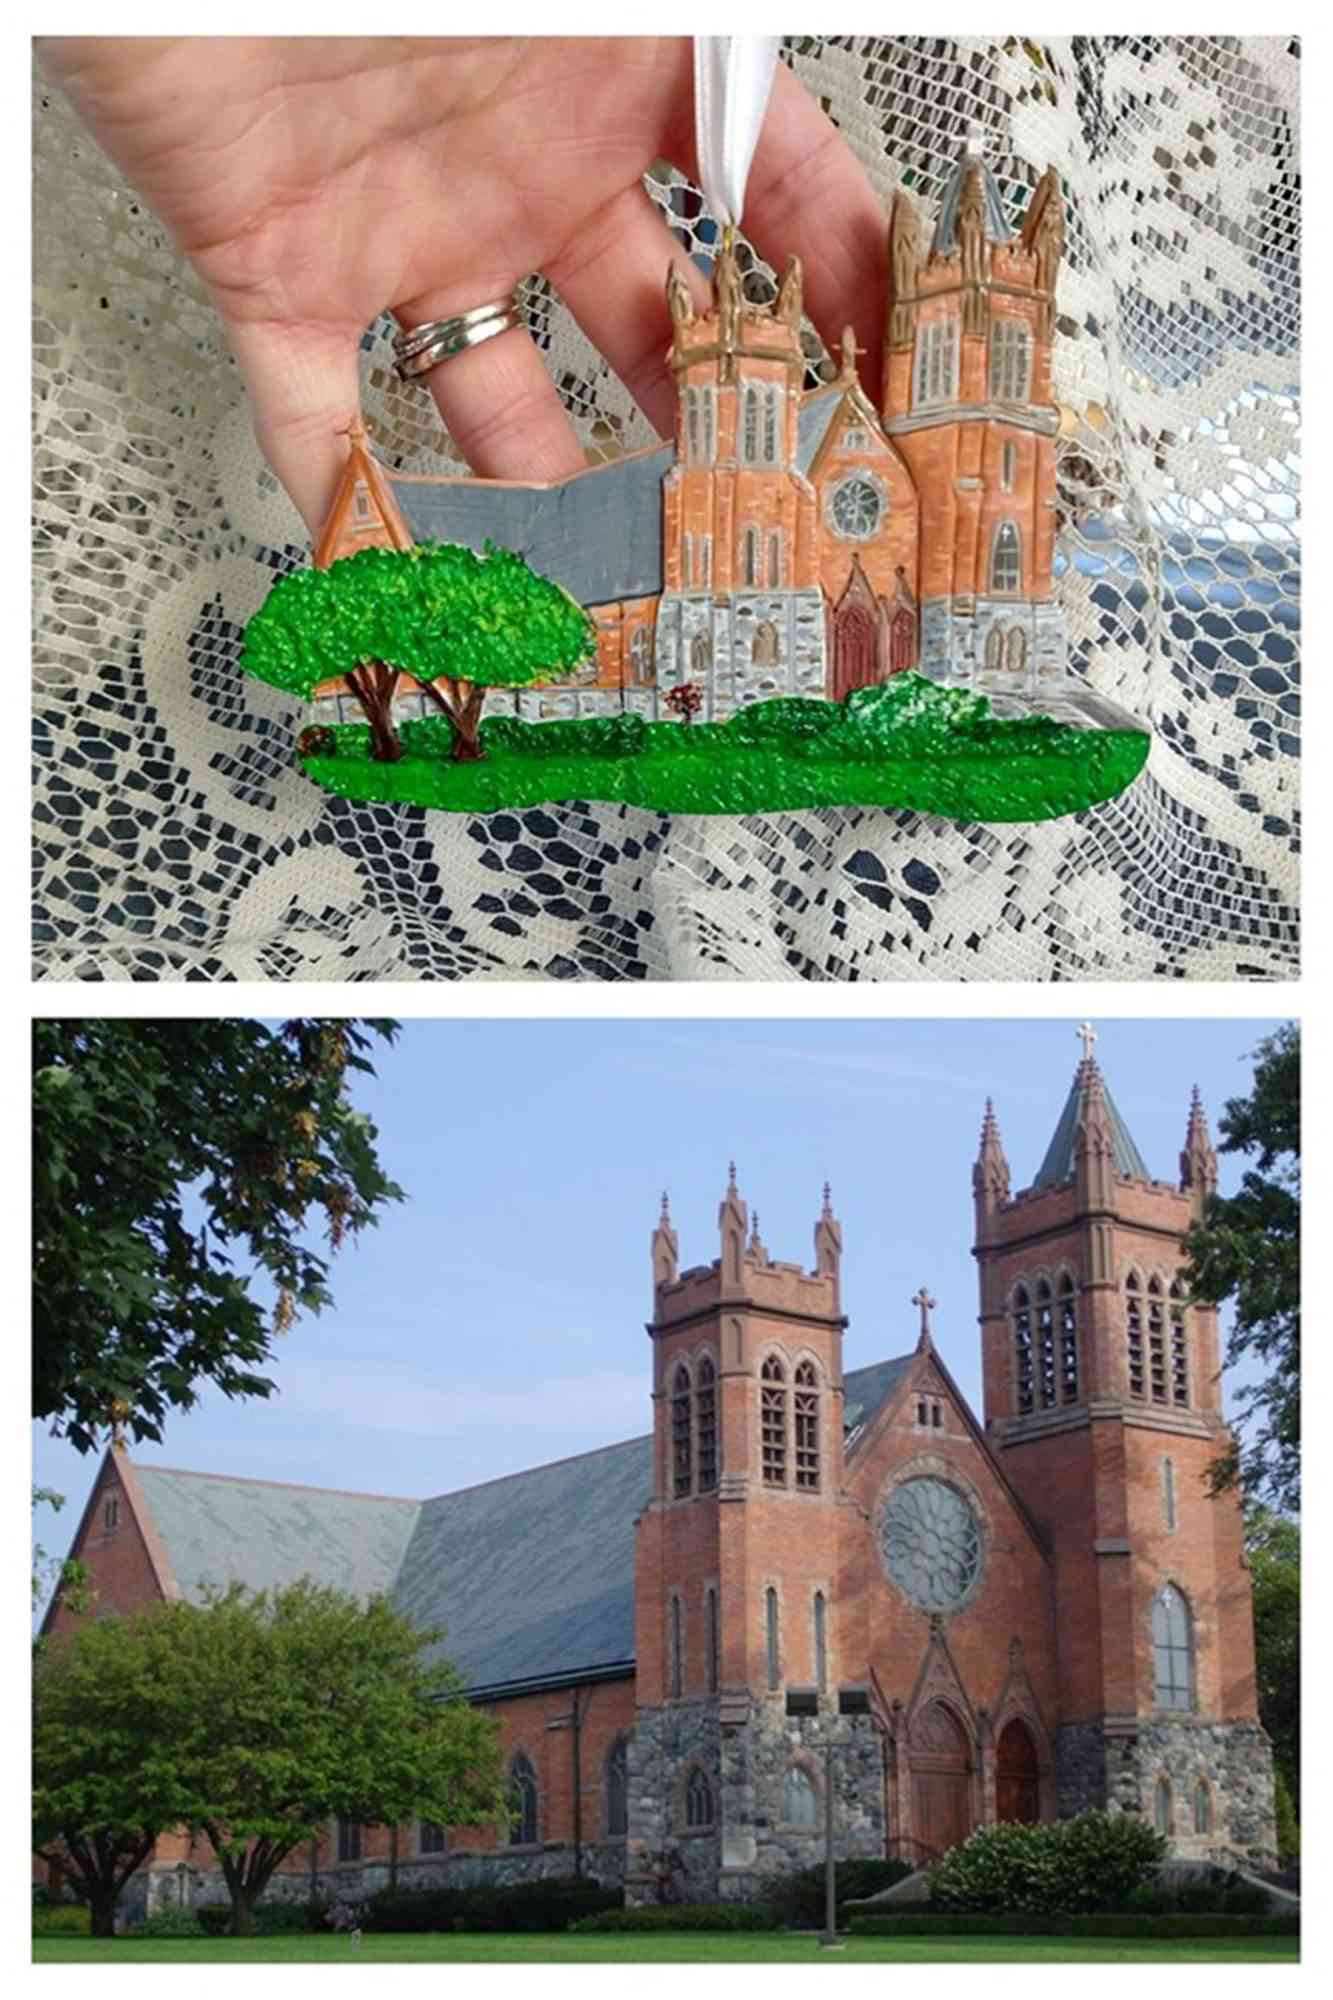 Etsy Shop Sells Christmas Ornaments that Are Mini Replicas of Homes